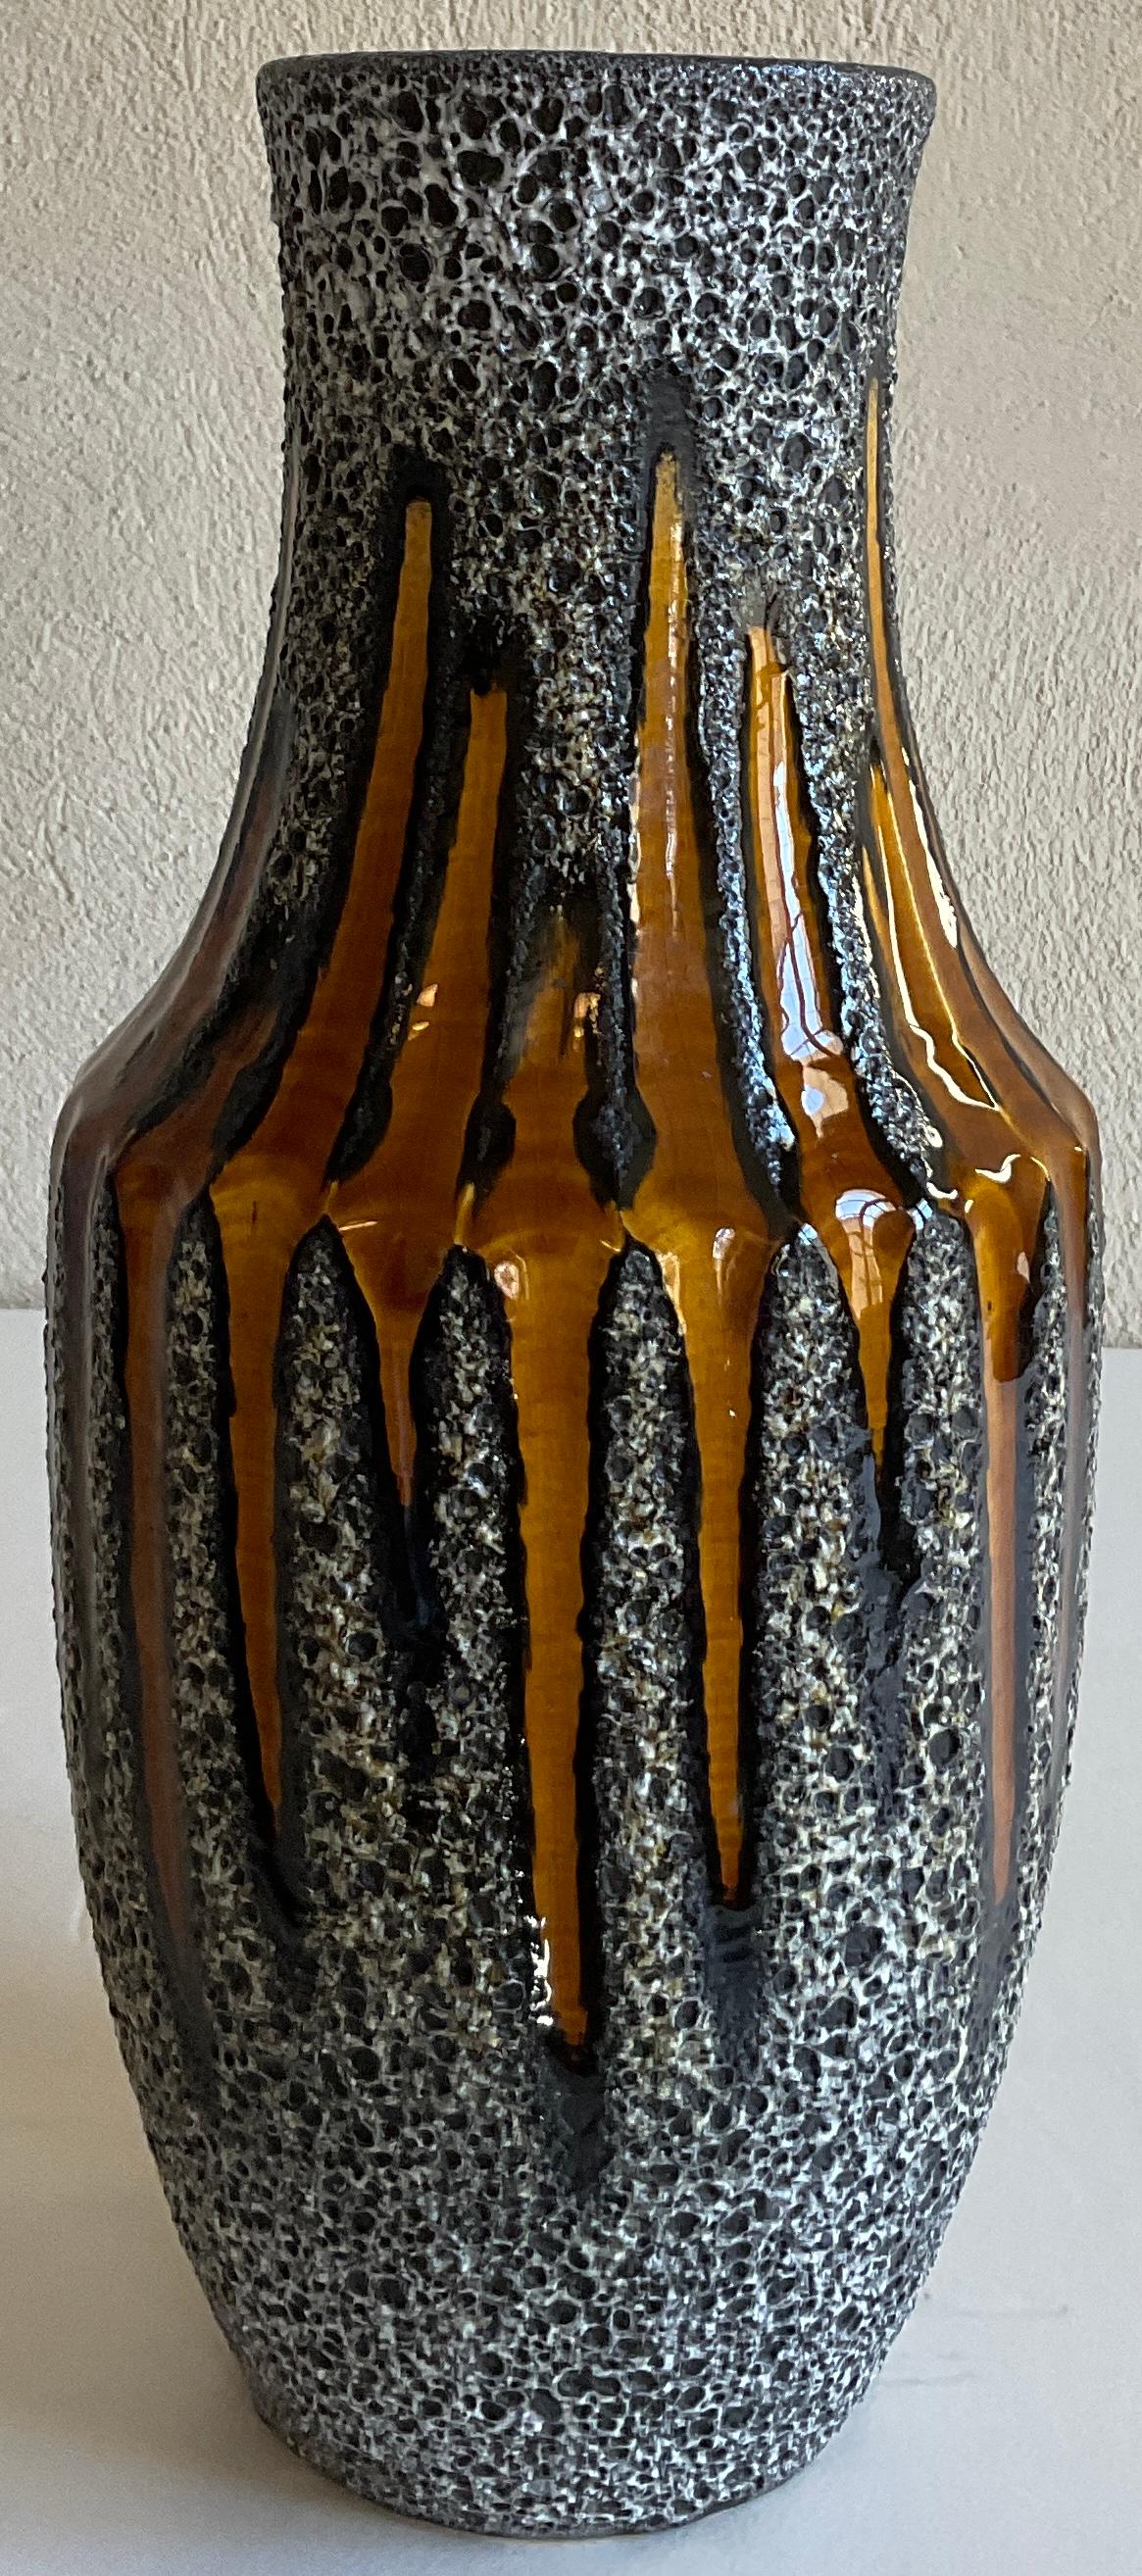 A very collectable midcentury  West Germany Studio Pottery Vase. This vintage handled vase features stunning midcentury details and subtle earth tone colors. 
A great decorative piece with minimalist and modernist simplicity.

This ceramic piece was